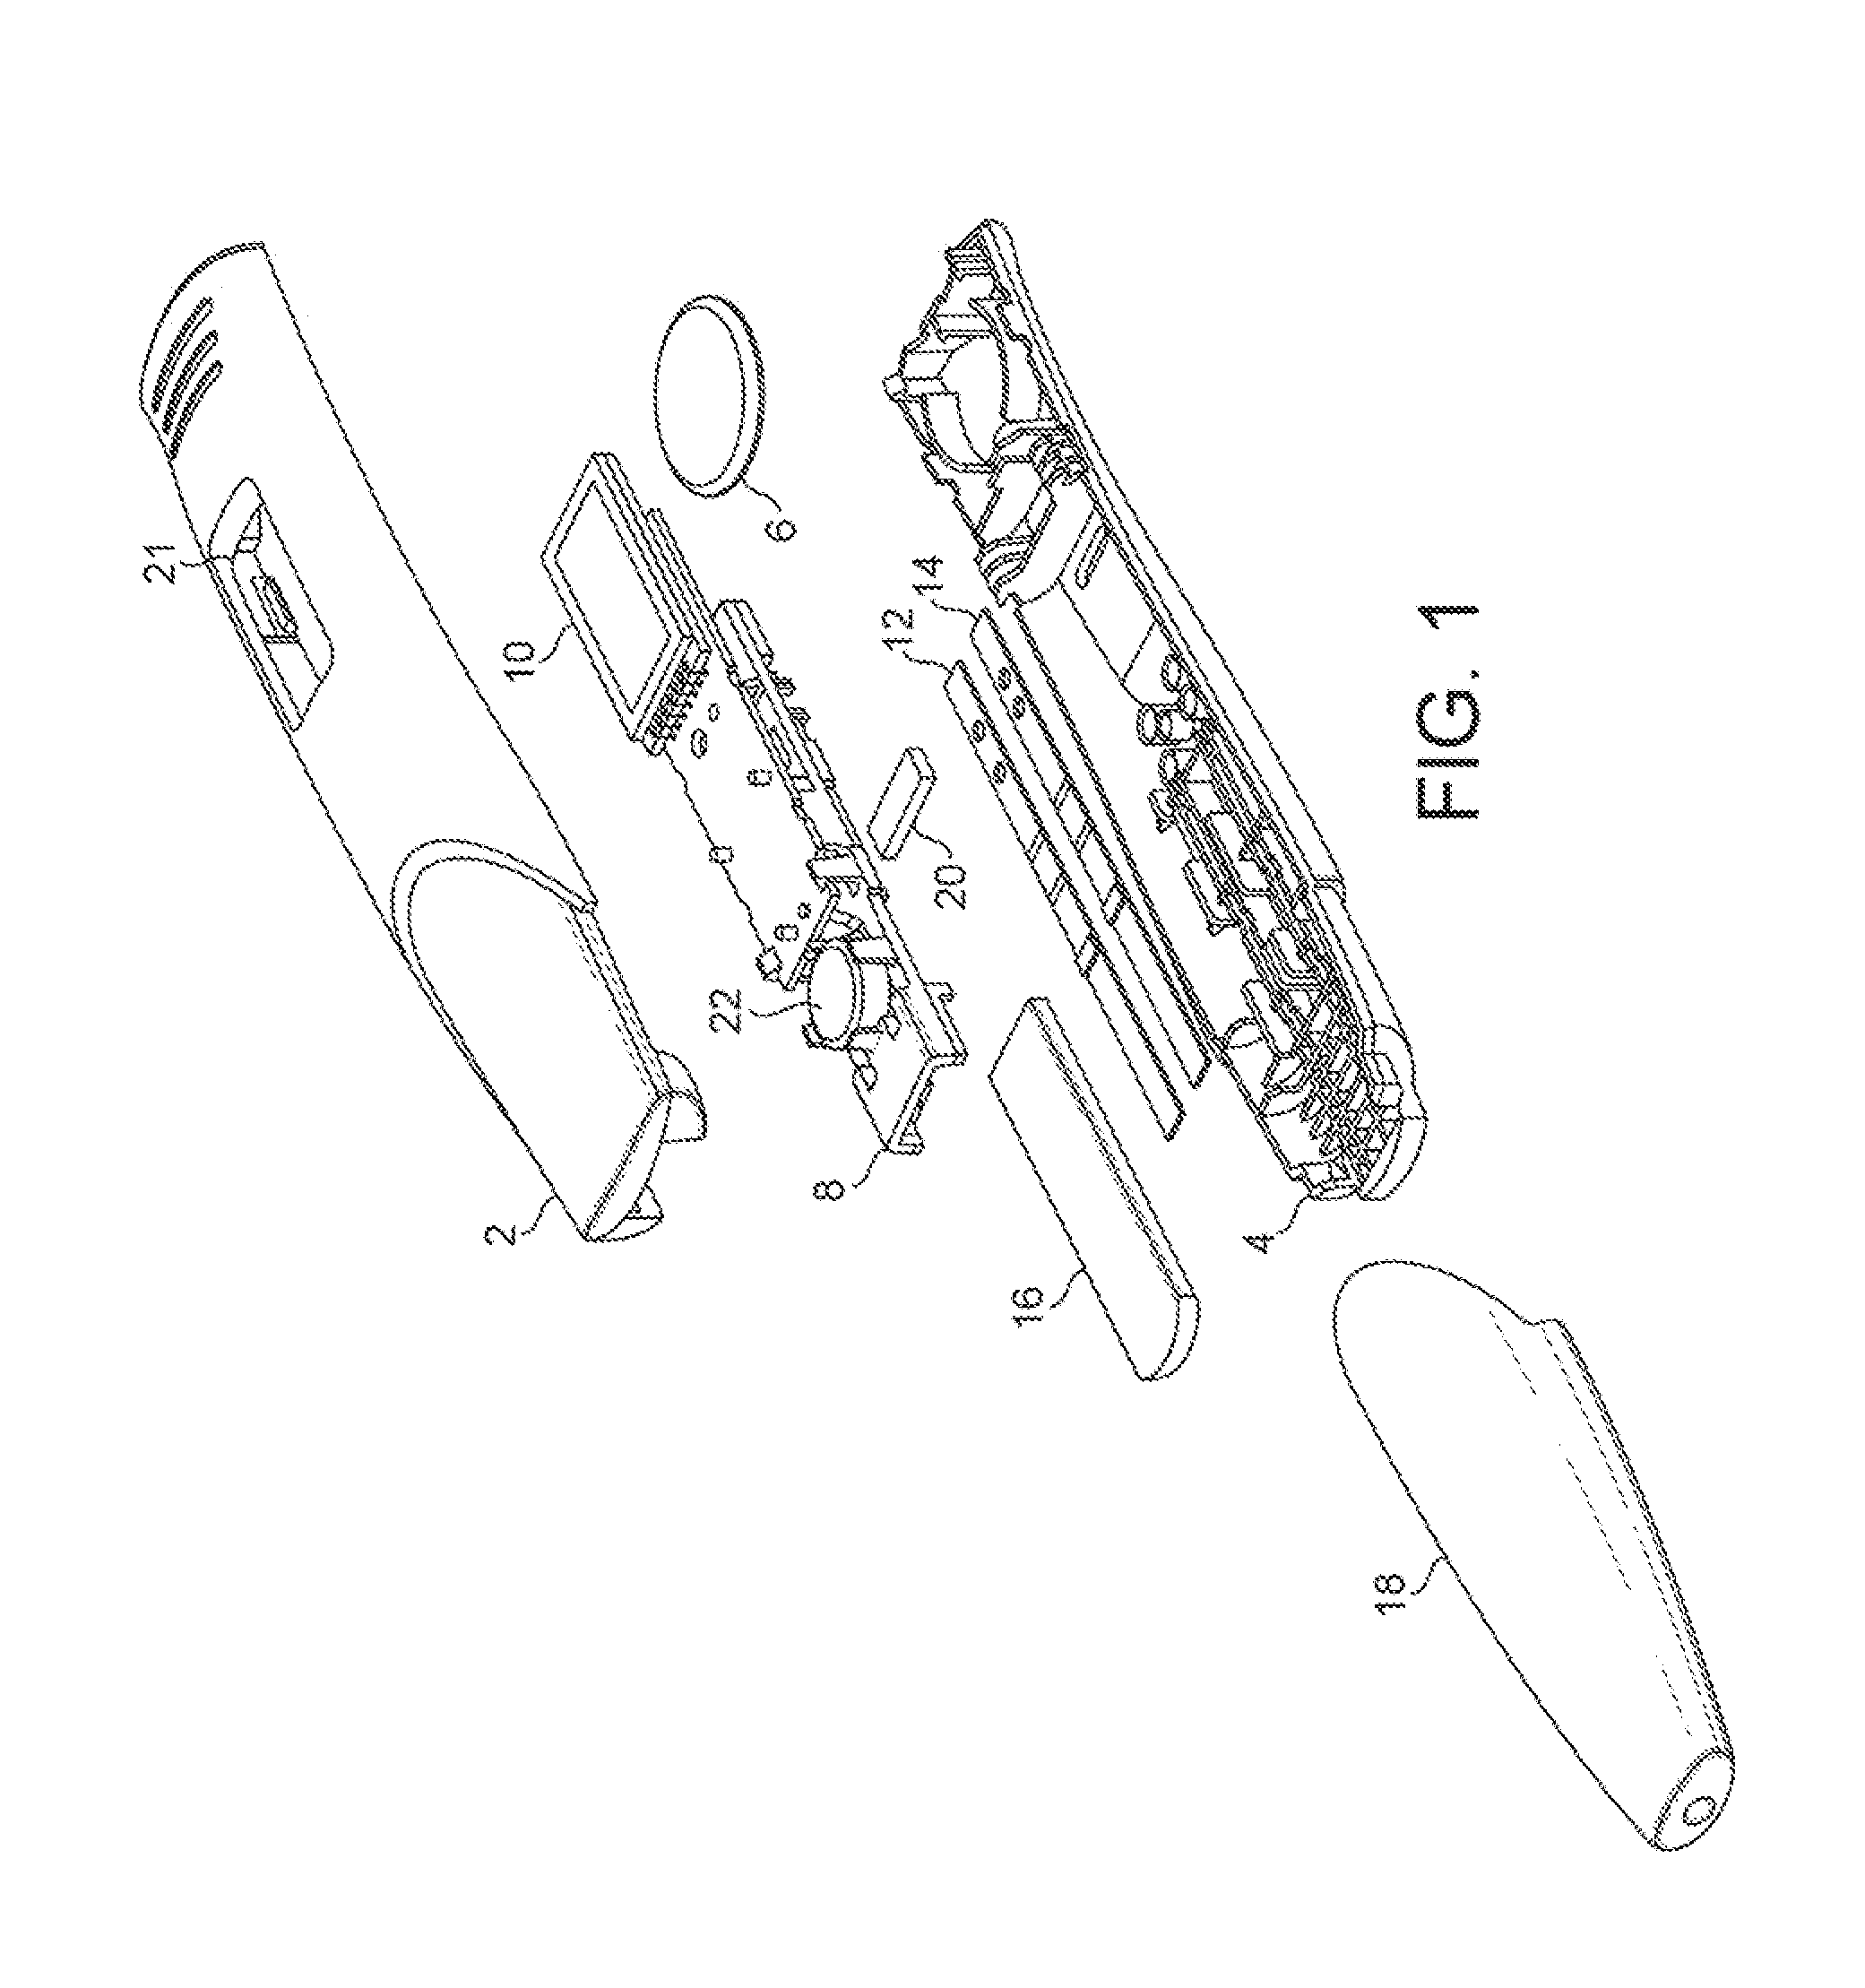 Pregnancy test device and method